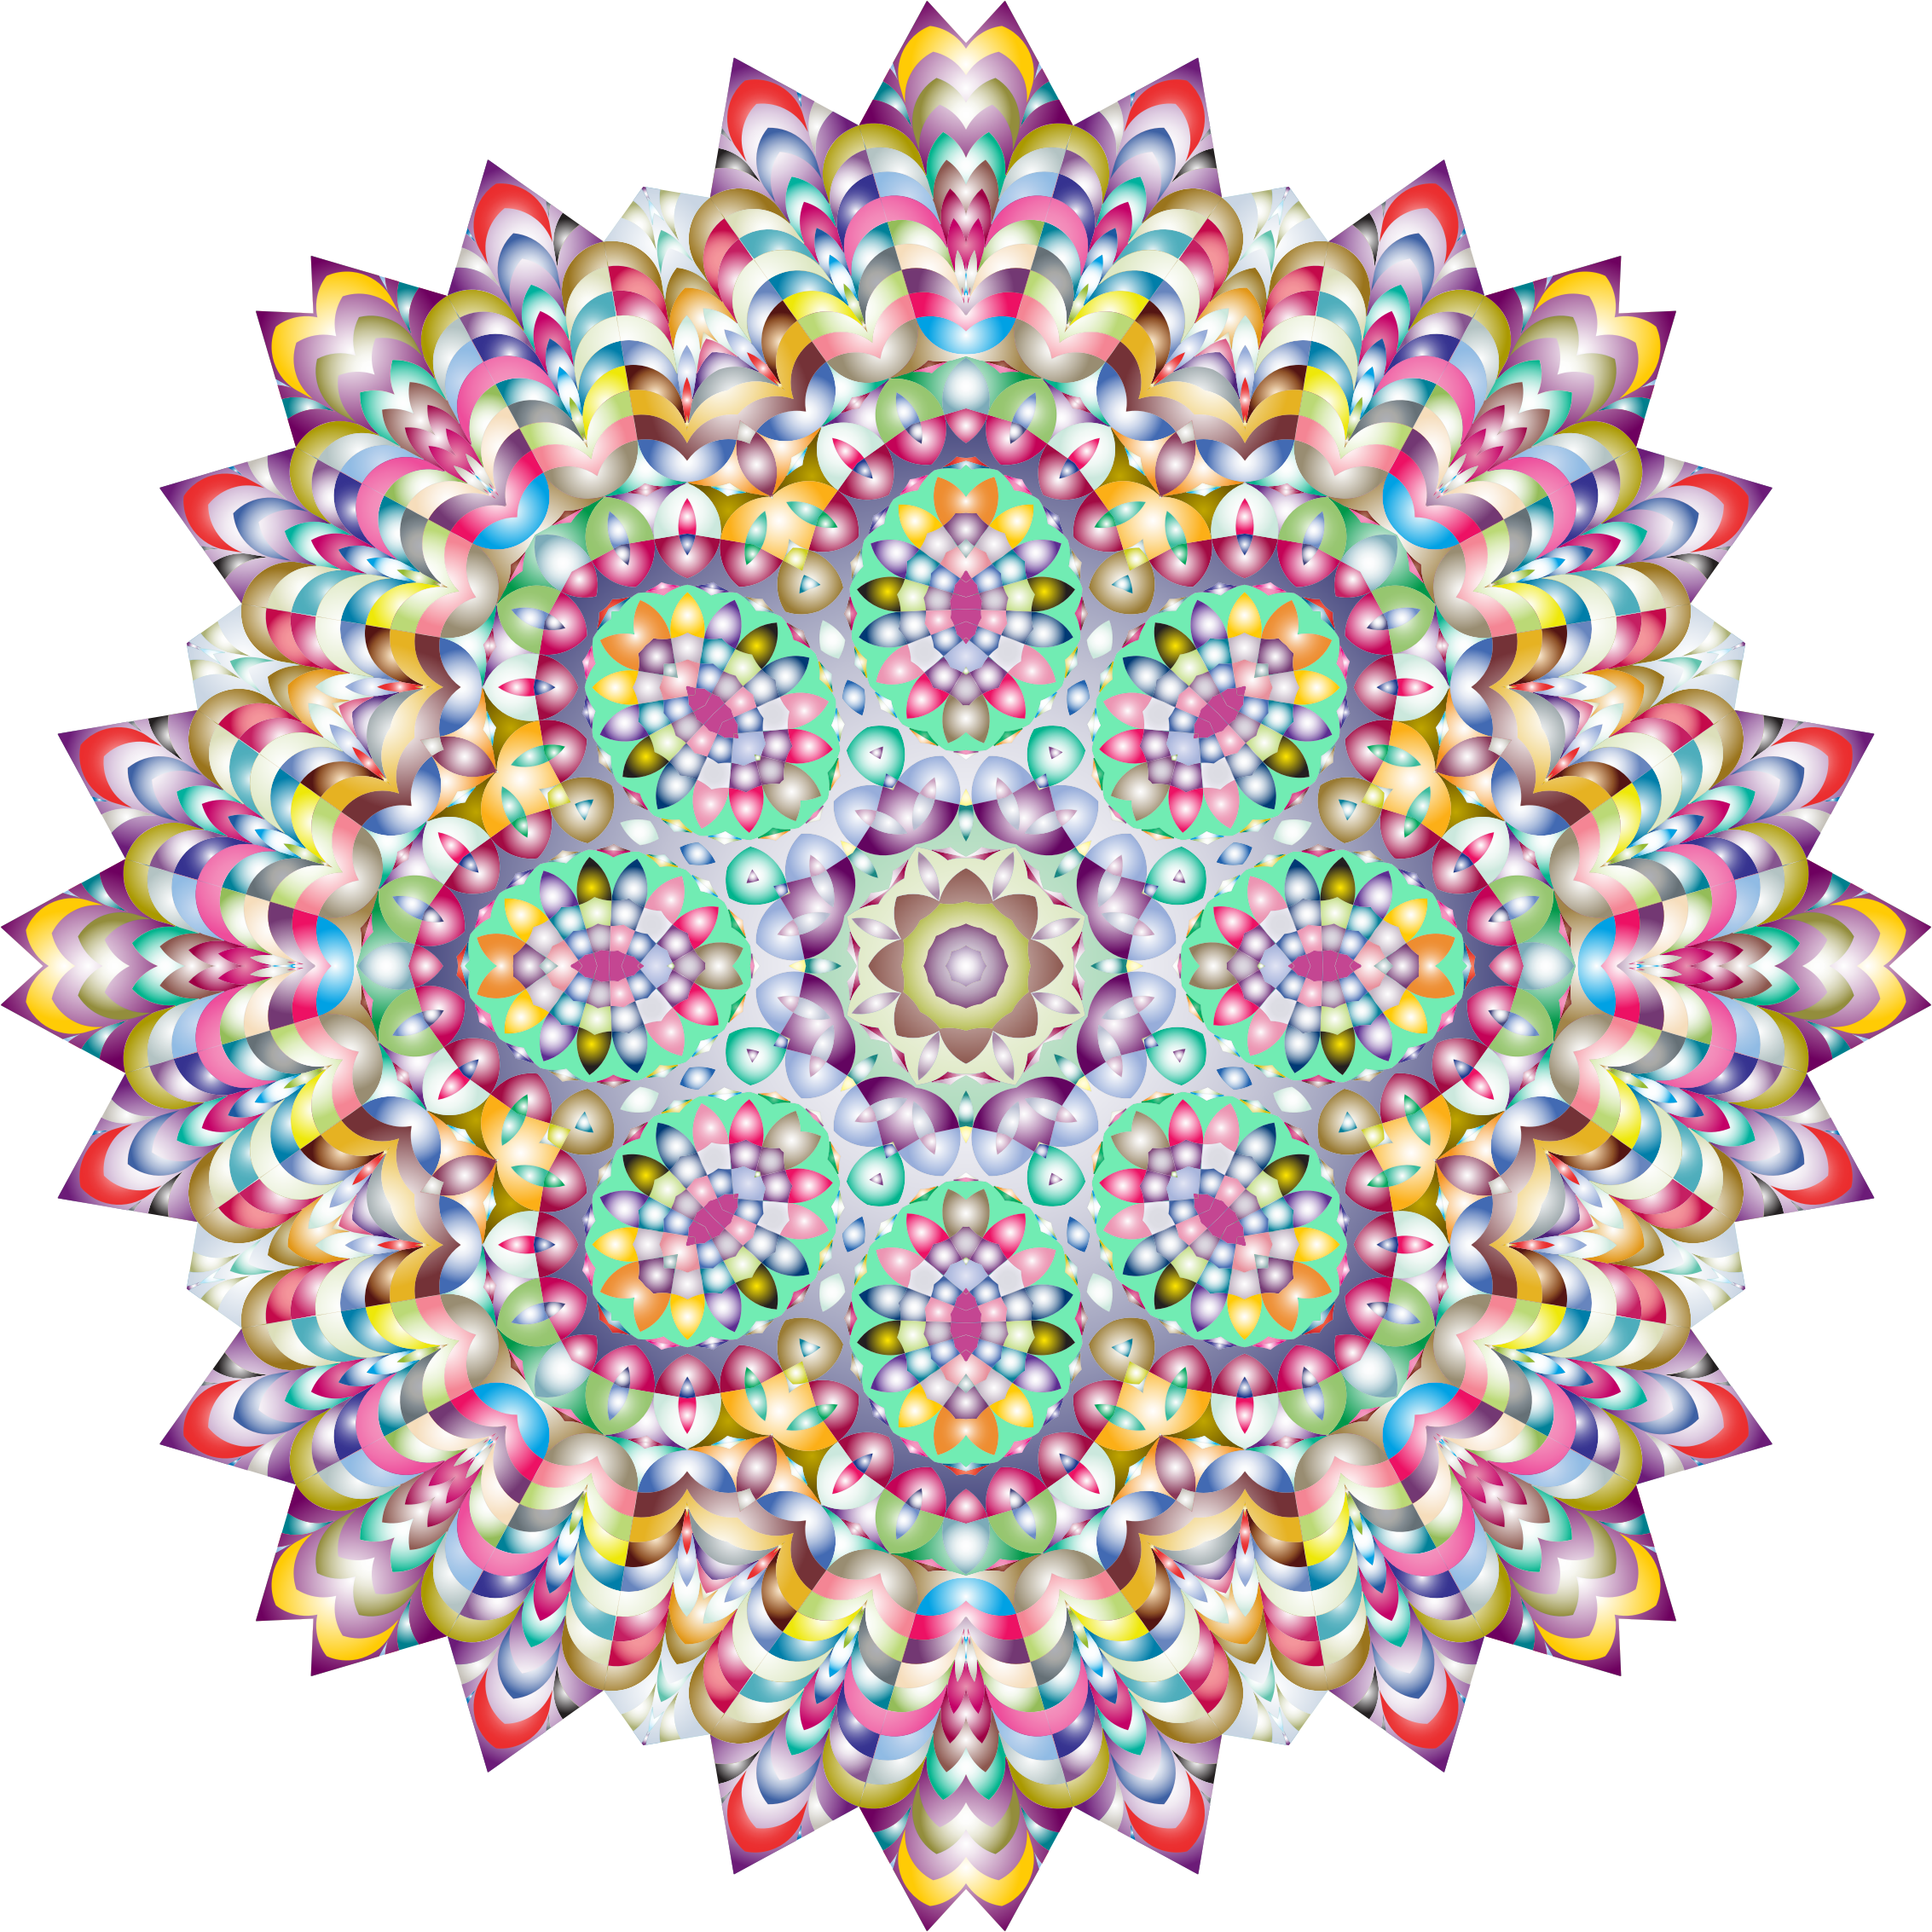 This Free Icons Png Design Of Prismatic Hypnotic Mandala - Neural Network Clip Art (2266x2266)